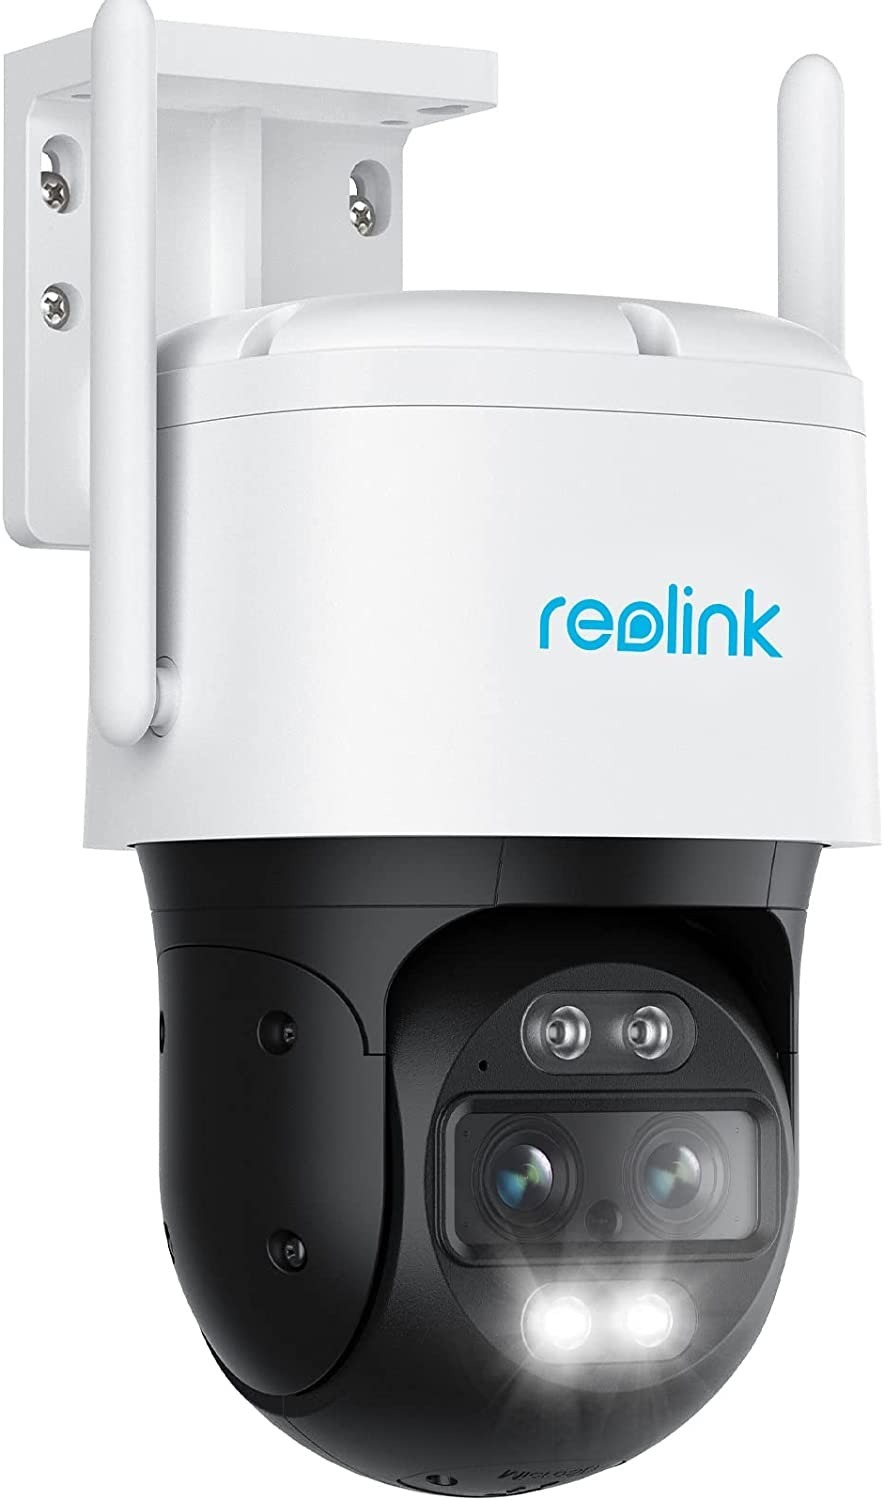 Reolink TrackMix WiFi 4K Dual Lens 2.4/5Ghz PTZ Wired Outdoor Camera w/ Spotlights, Motion Tracking $128.79 + Free Shipping